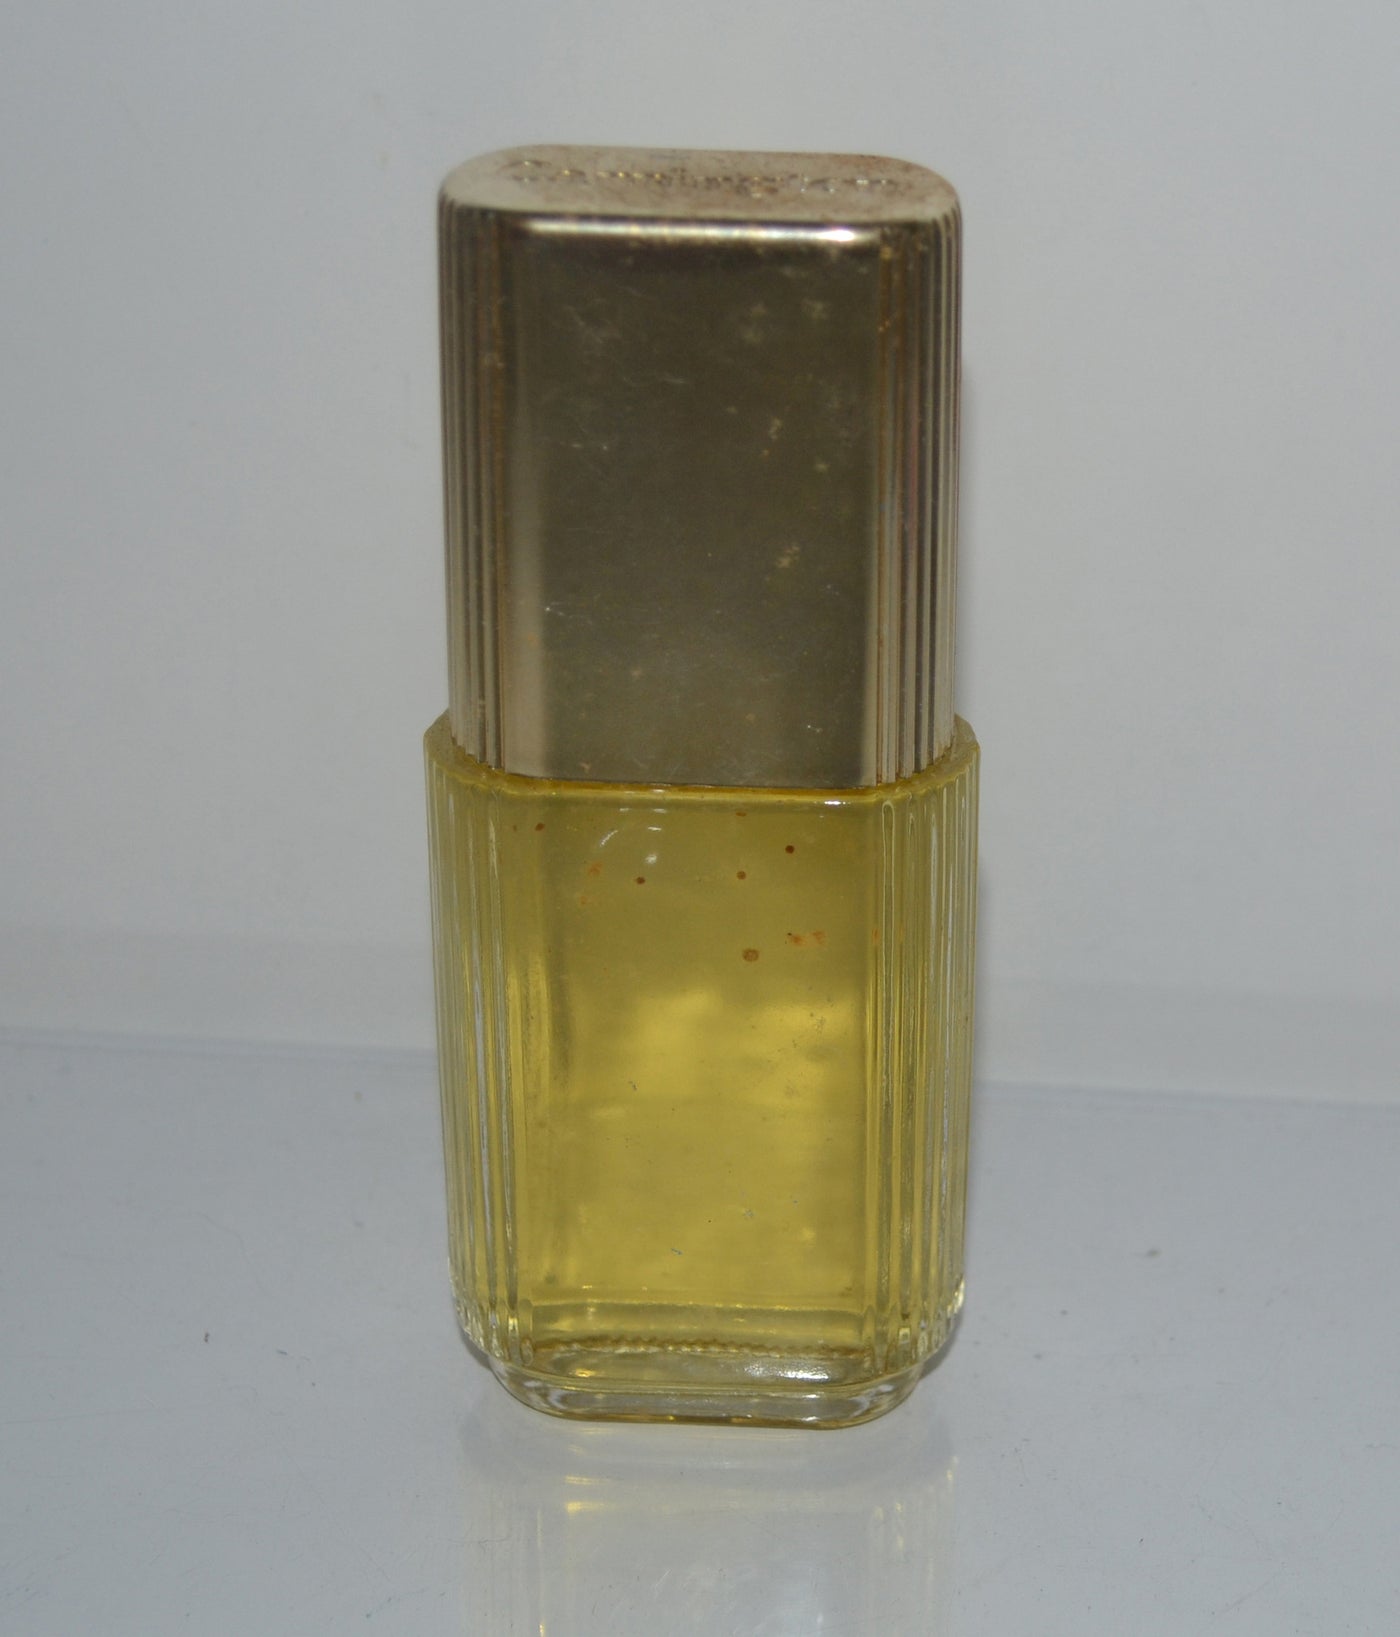 Carrington After Shave By Charles Of The Ritz